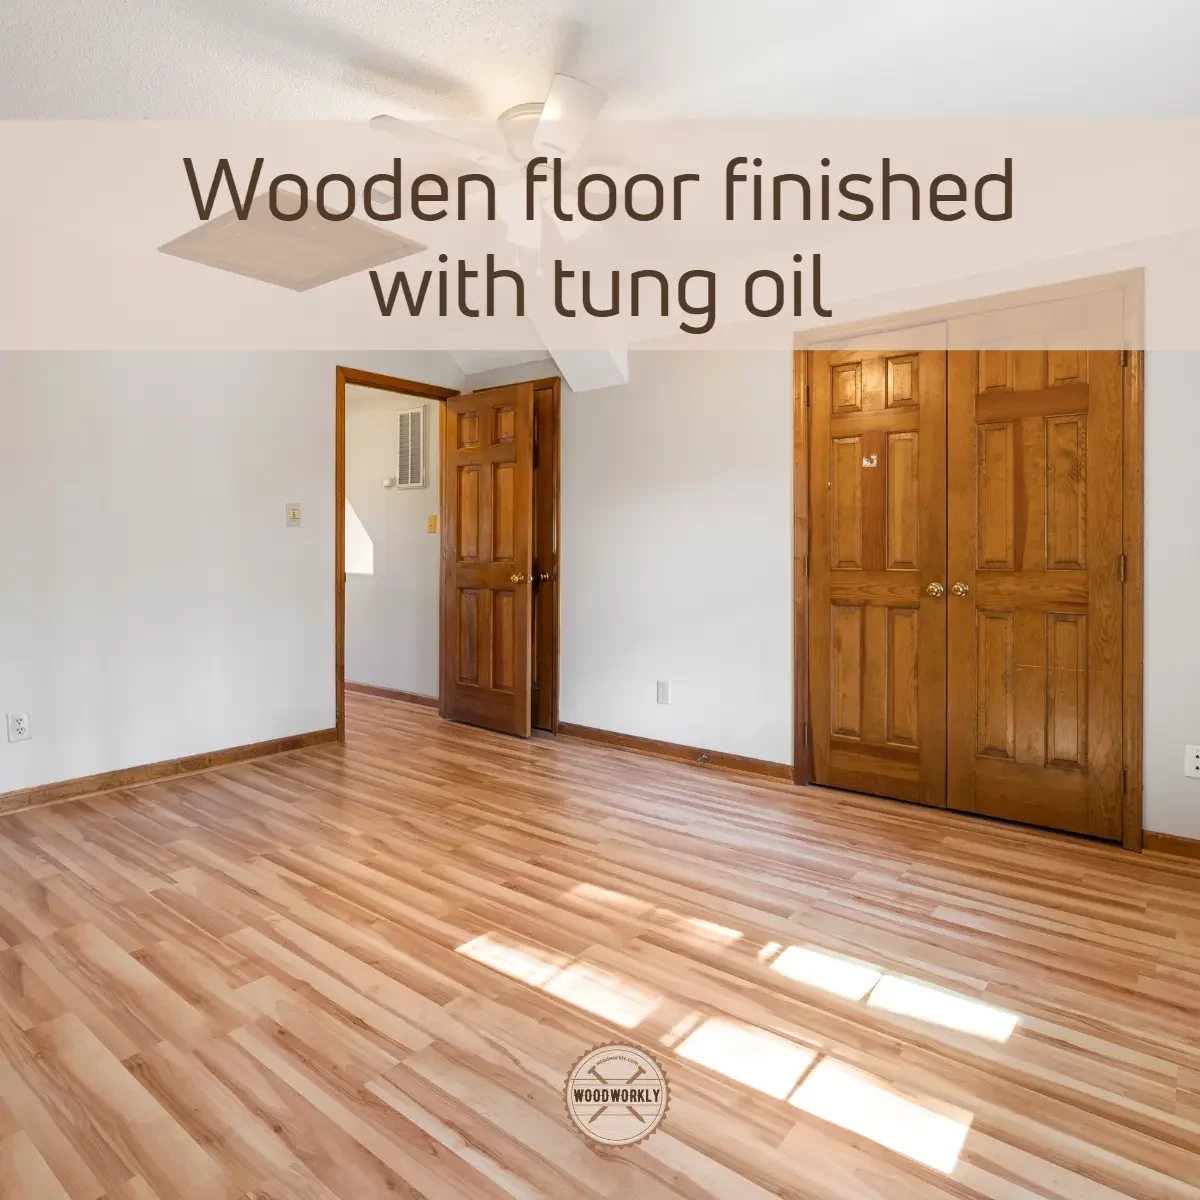 wooden floor finished with tung oil